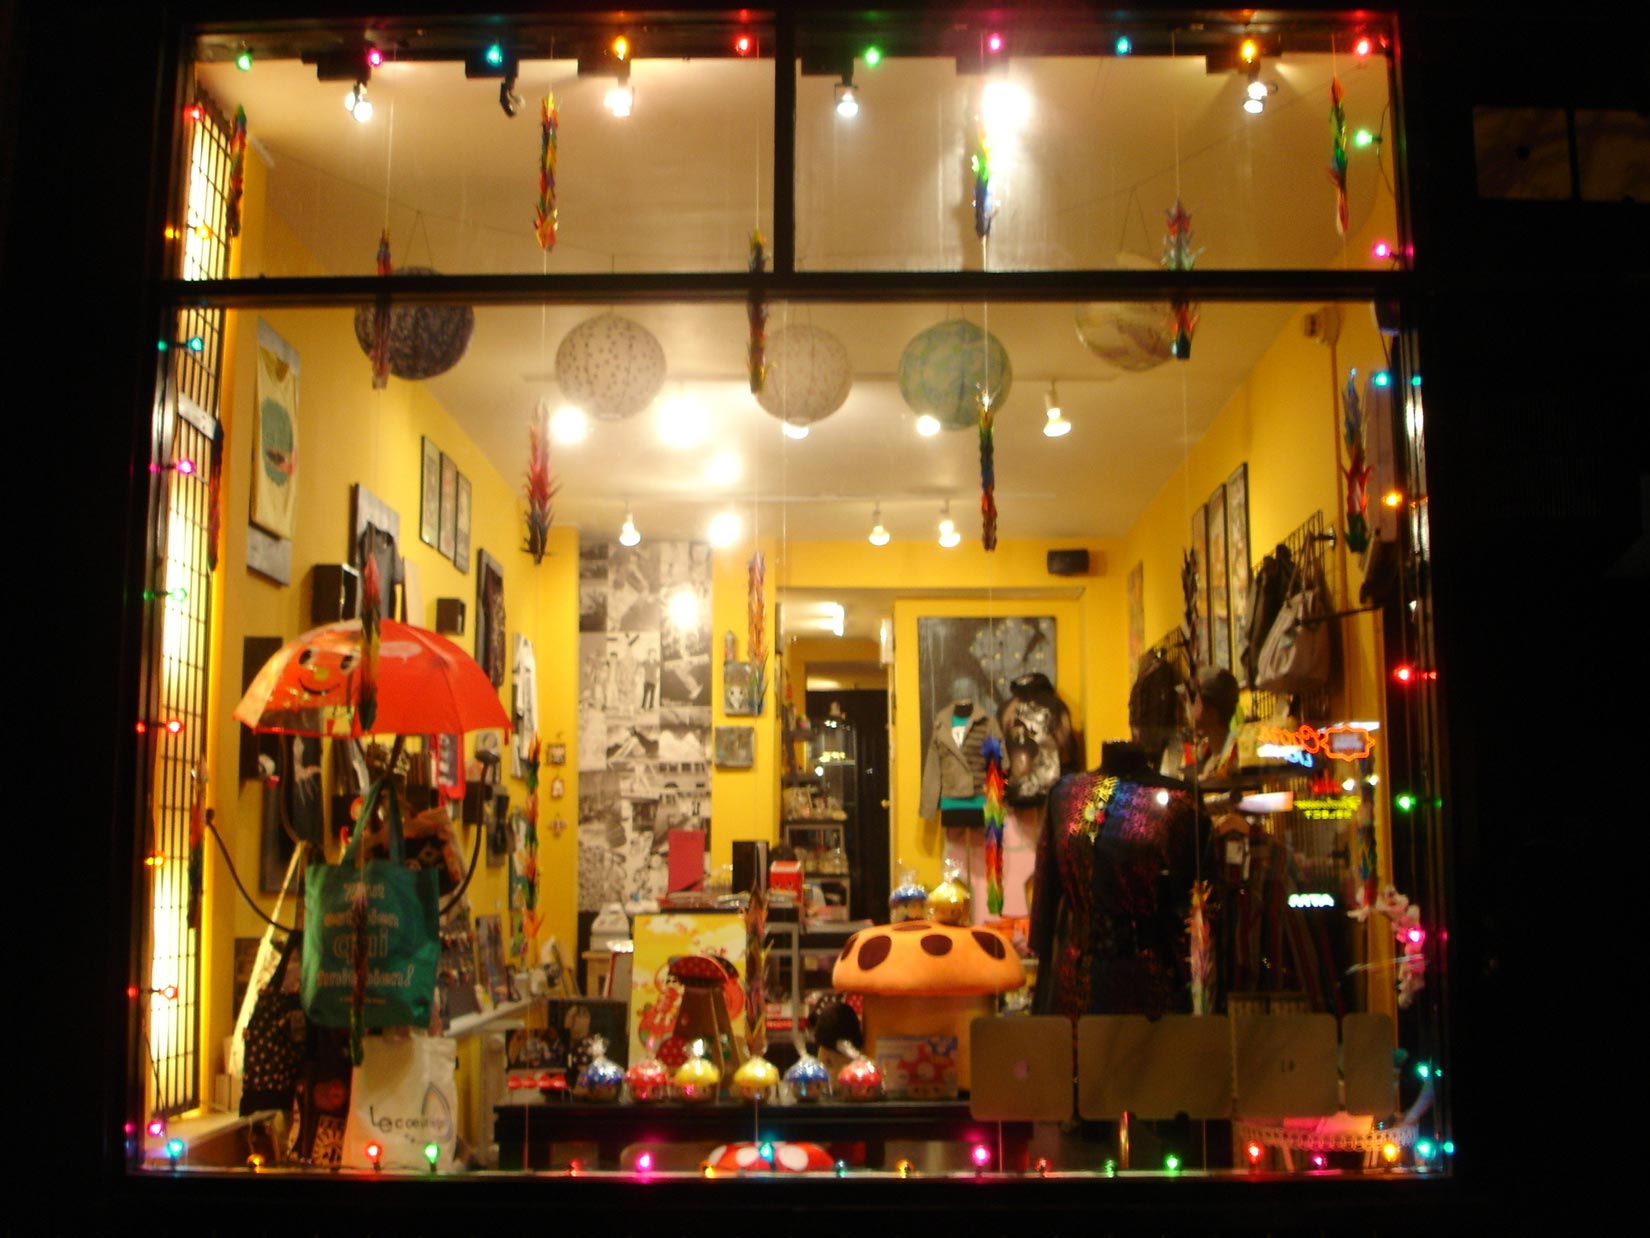 The storefront back in 2008, featuring the magic mushroom stool we all wish we bought